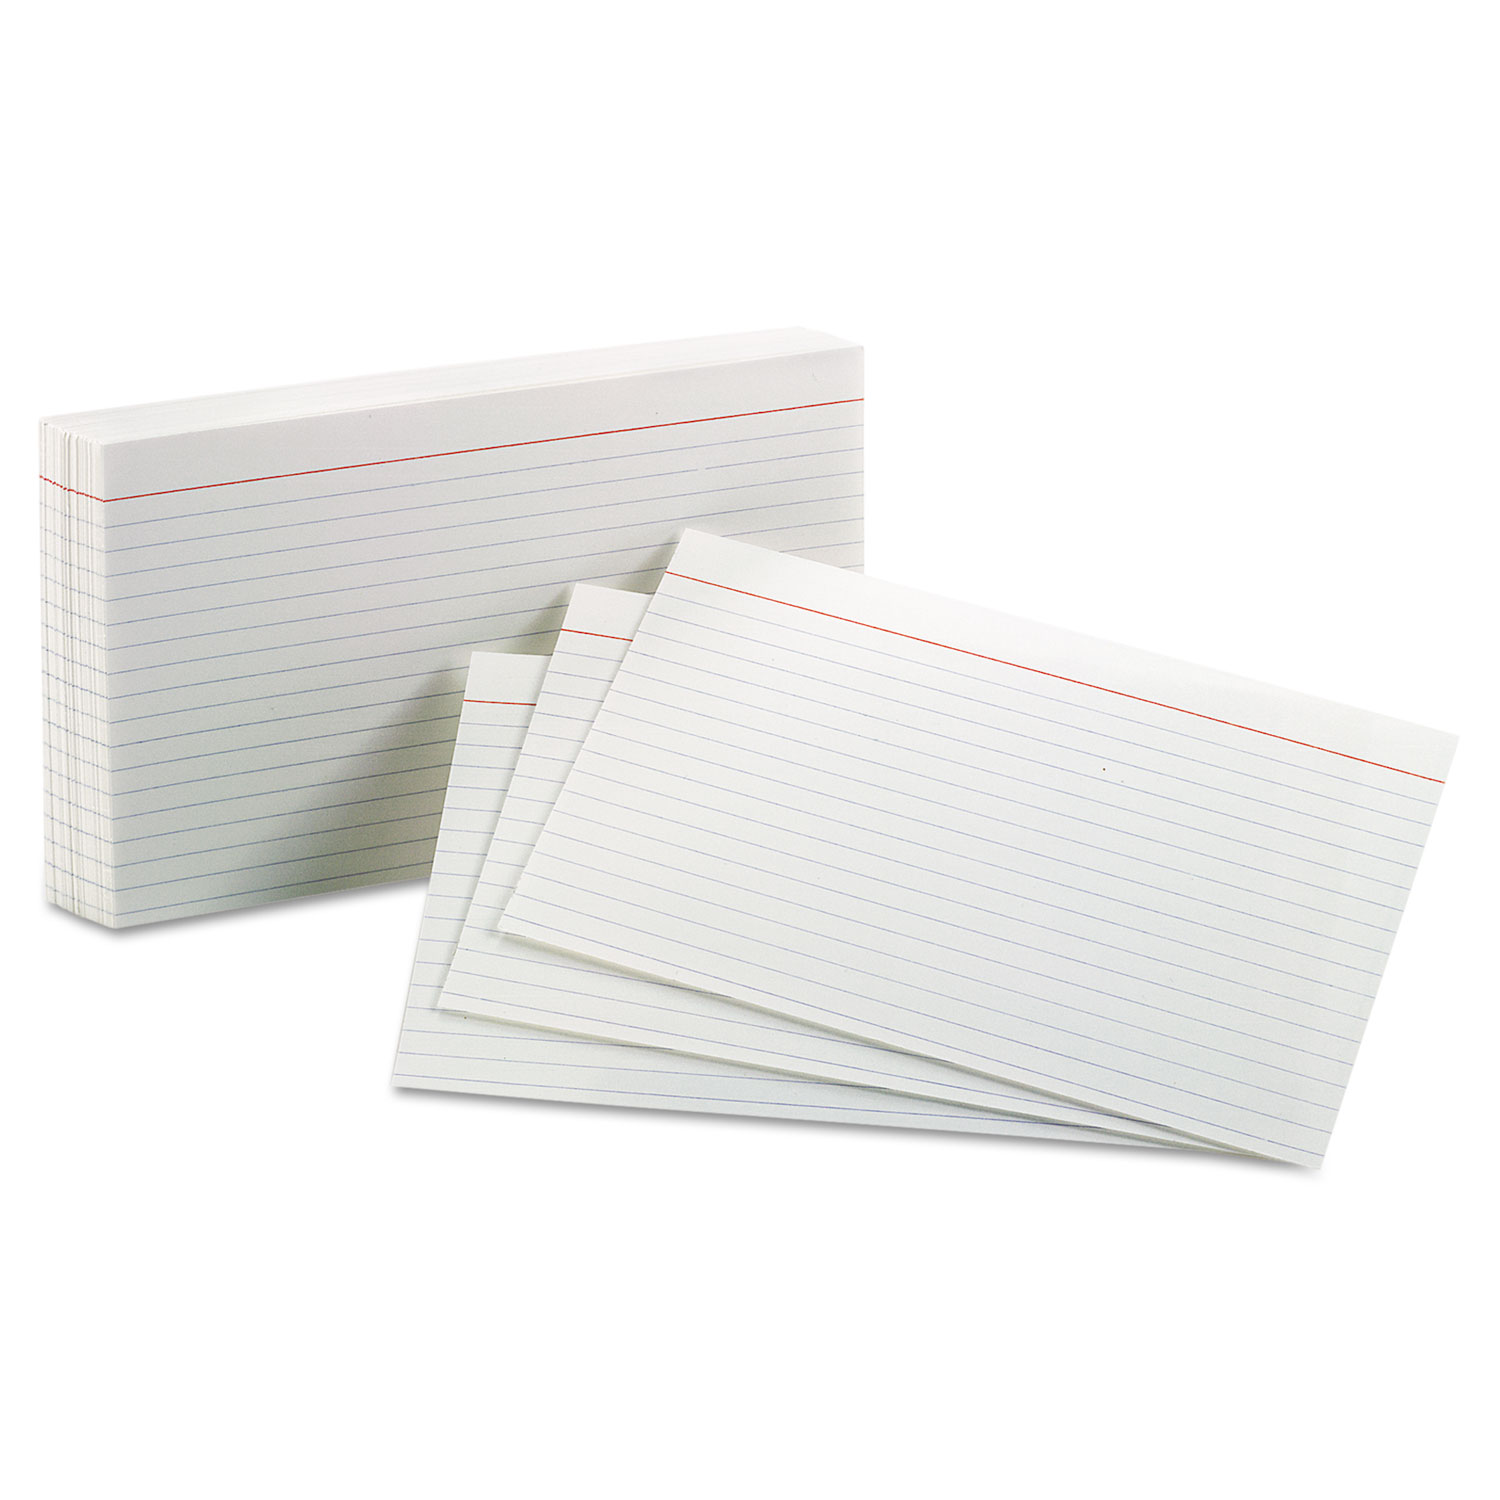 Oxford Ruled Color Index Cards, 3 x 5, Canary, 100 Per Pack